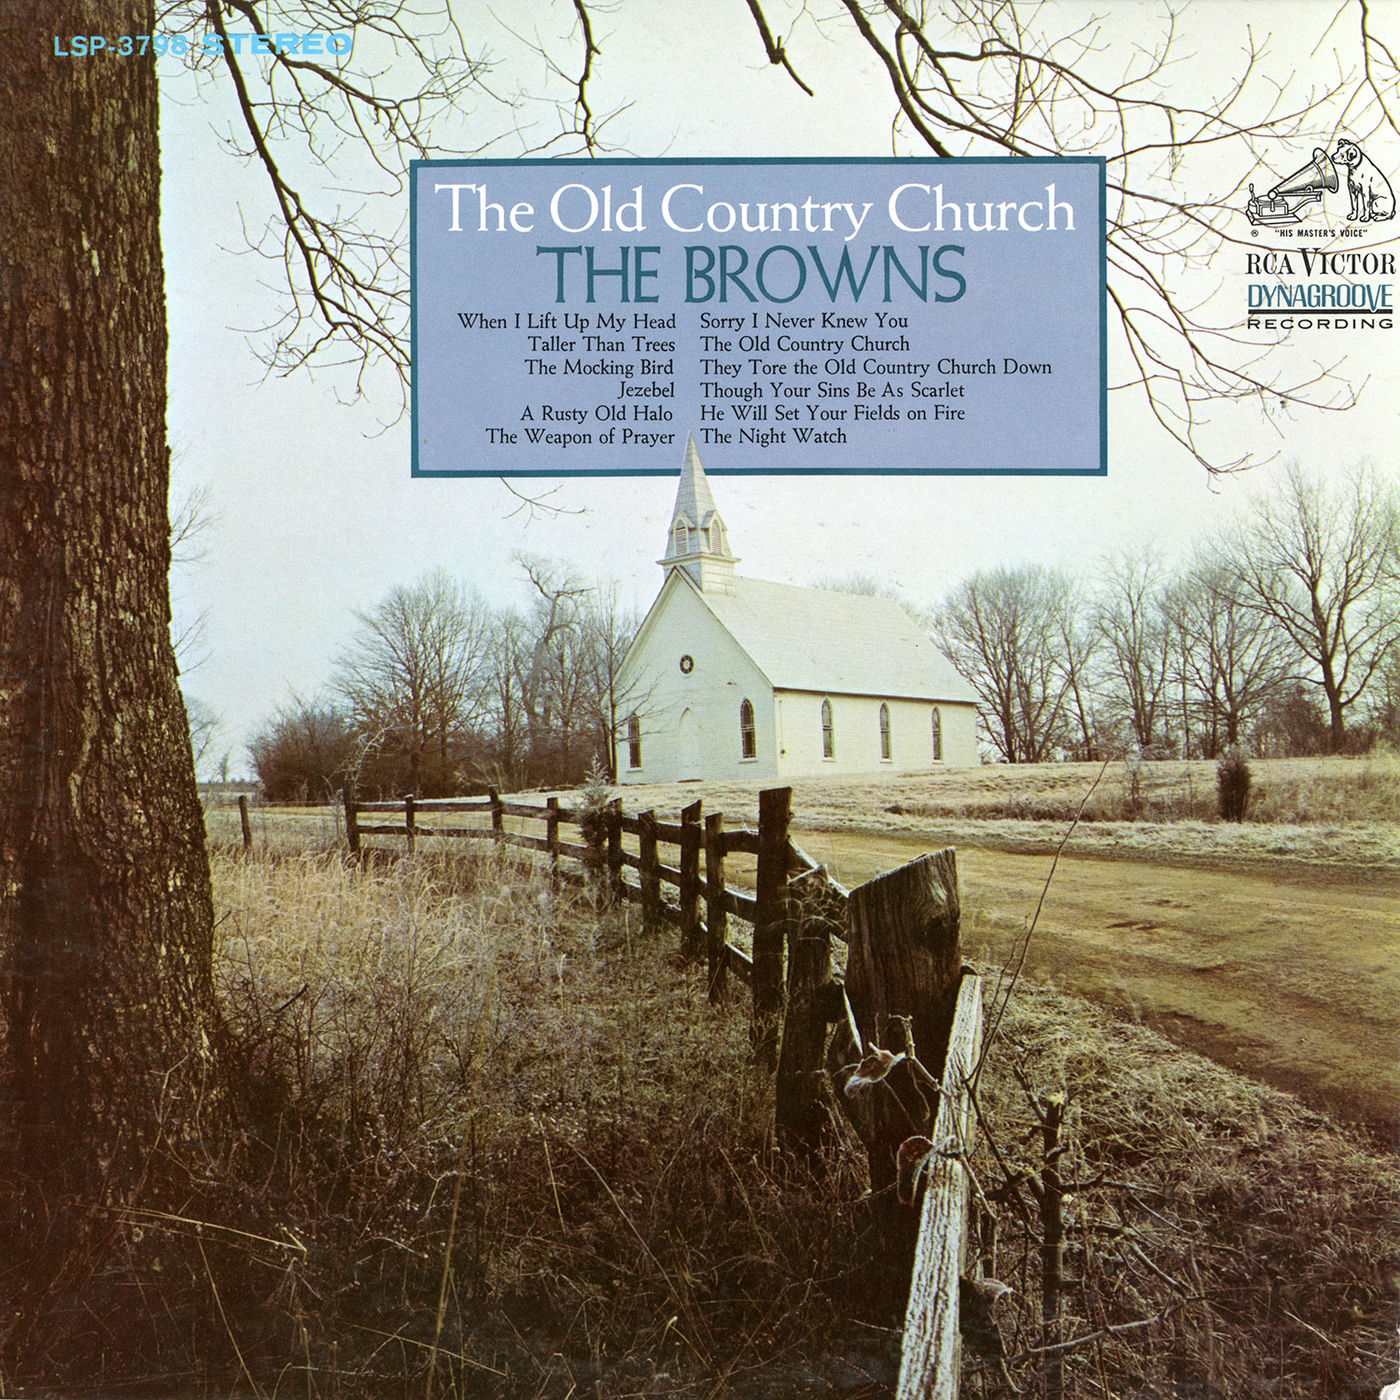 The Browns – The Old Country Church